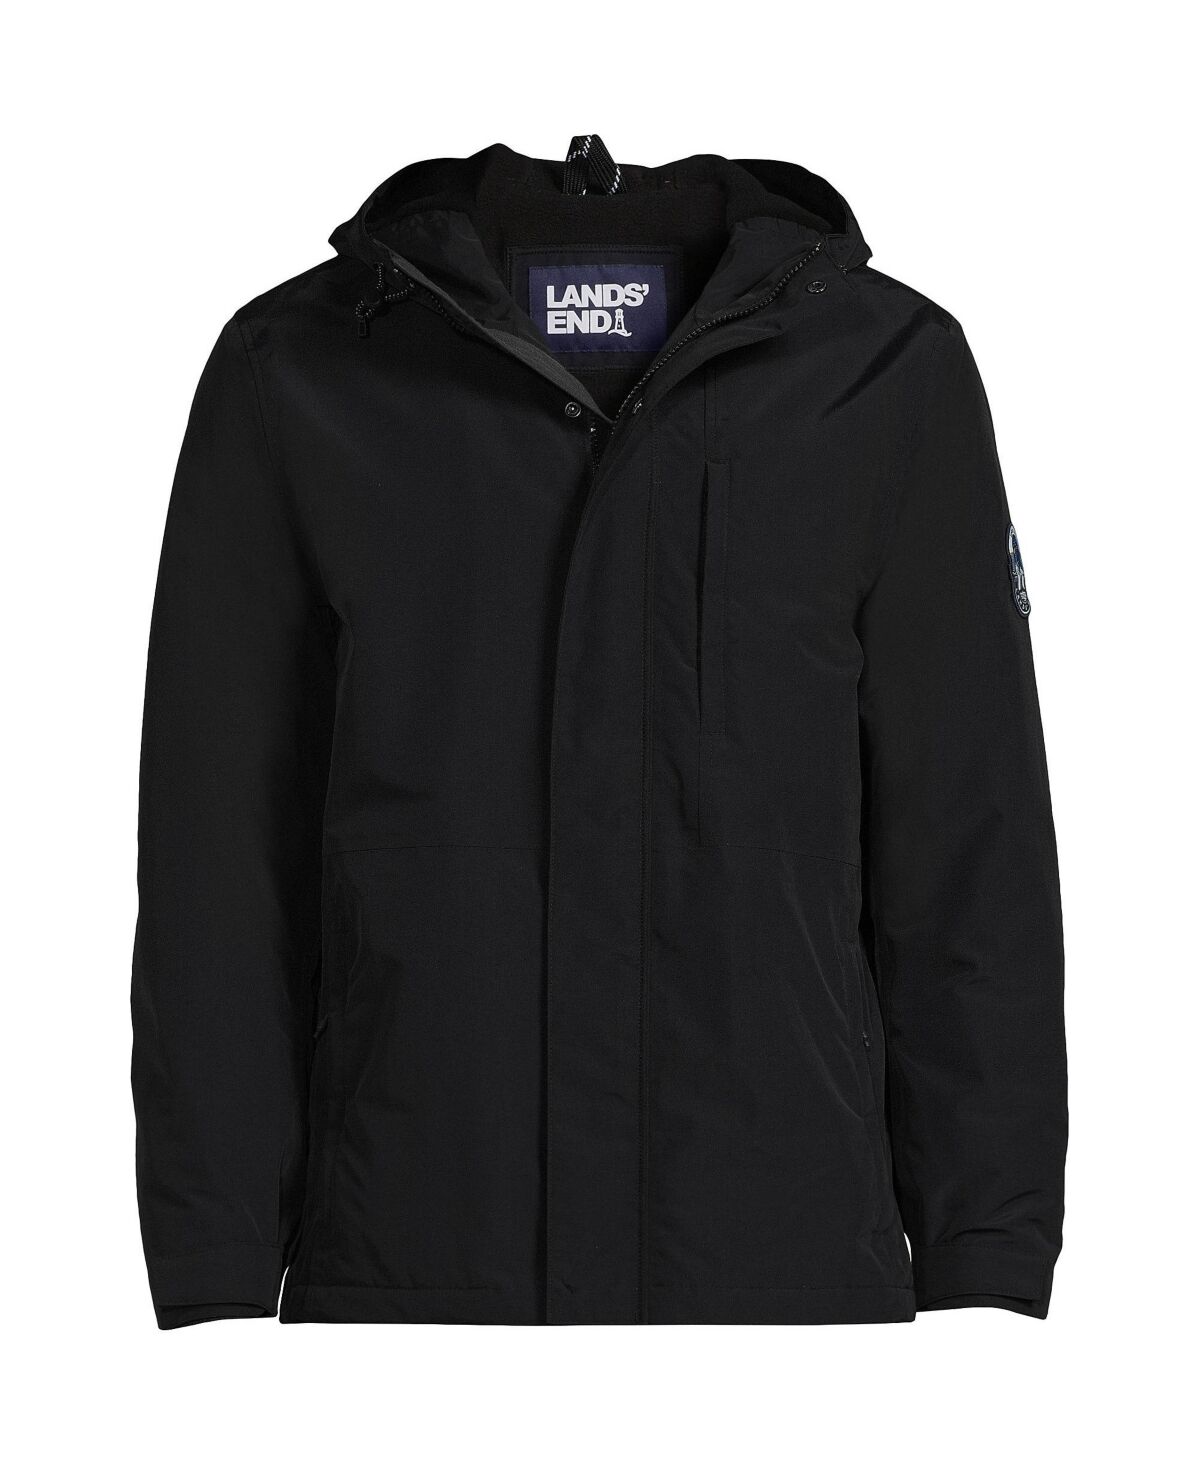 Lands' End Men's Tall Squall Waterproof Insulated Winter Jacket - Black